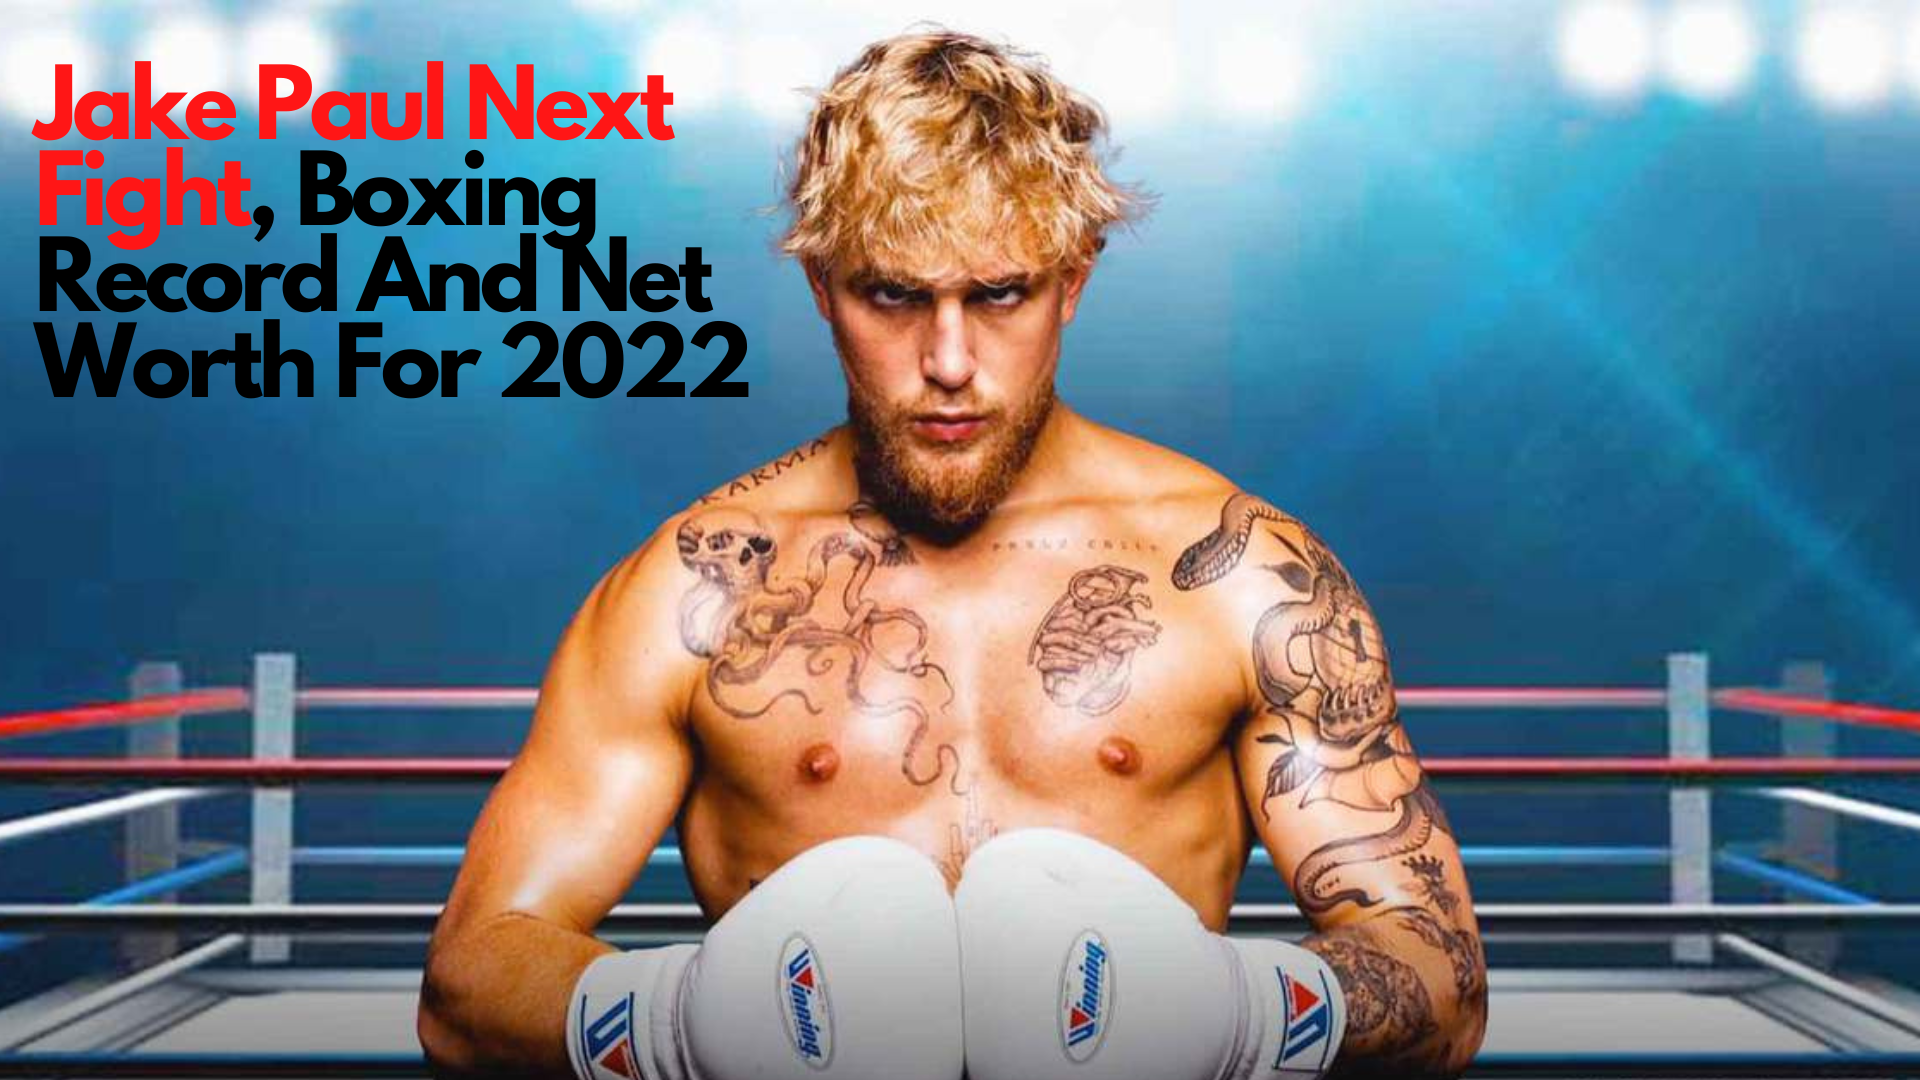 Jake Paul Next Fight, Boxing Record And Net Worth For 2022